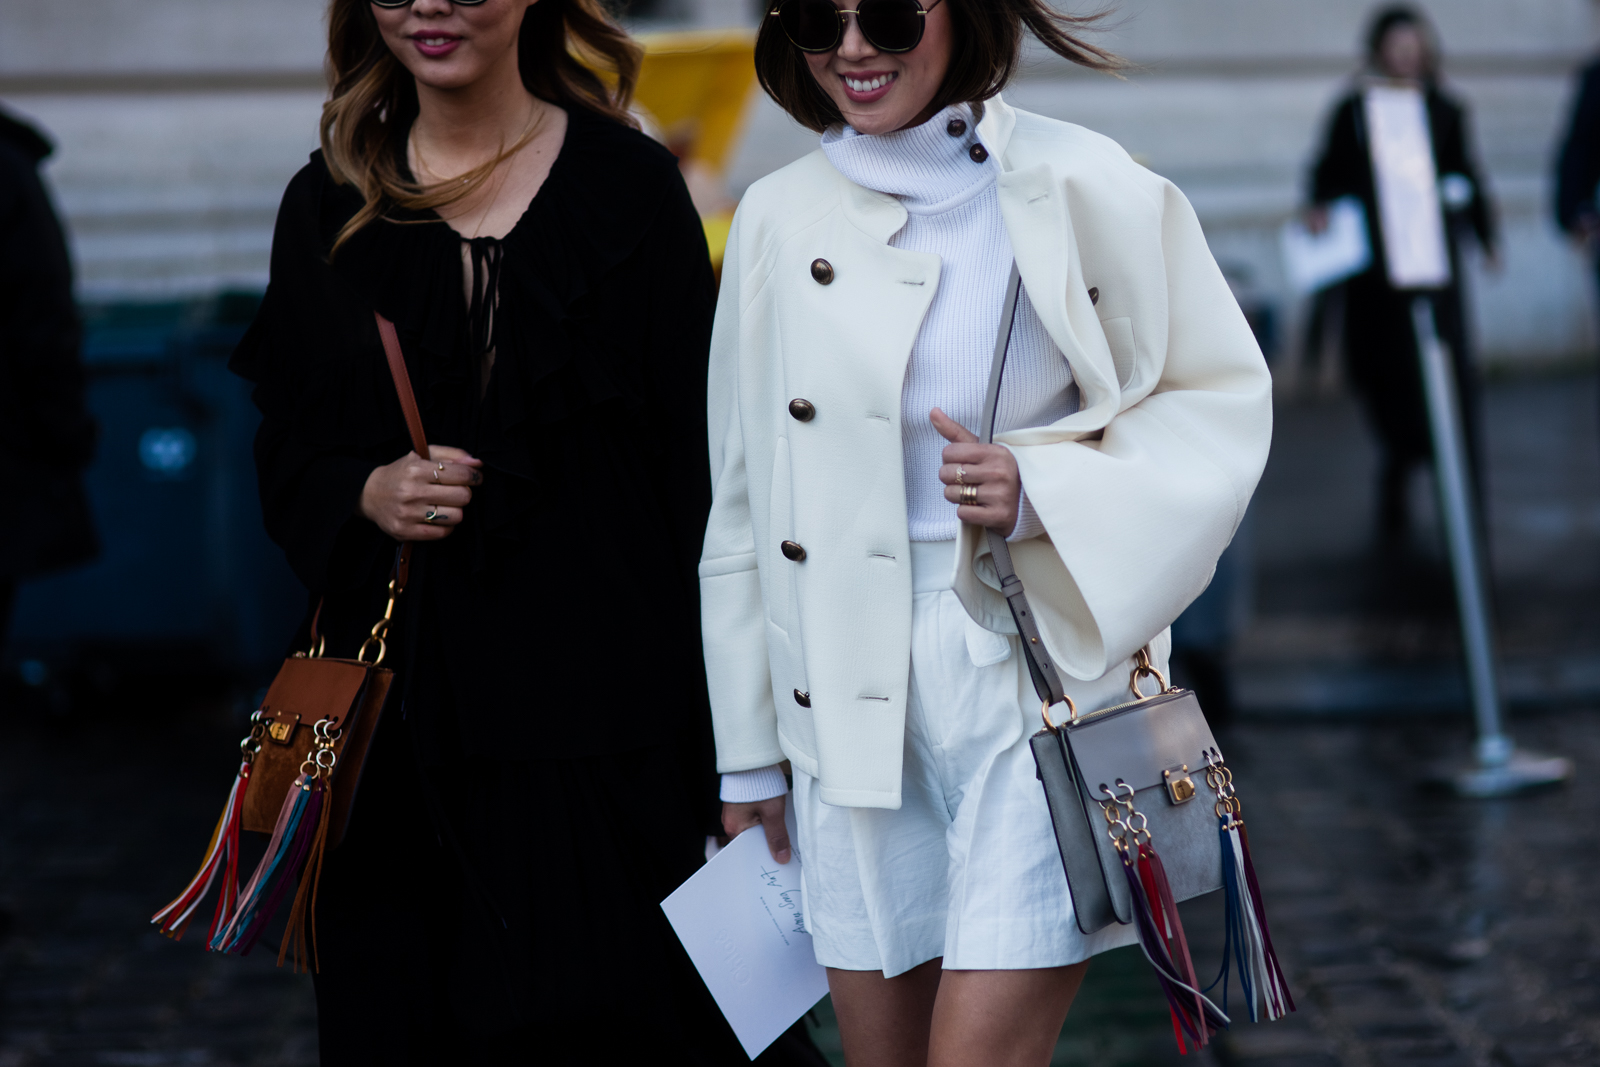 Aimee Song + Dani Song wearing Chloe outfits and fringed bags before the Chloe Fall/Winter 2016-2017 fashion show in Paris, France